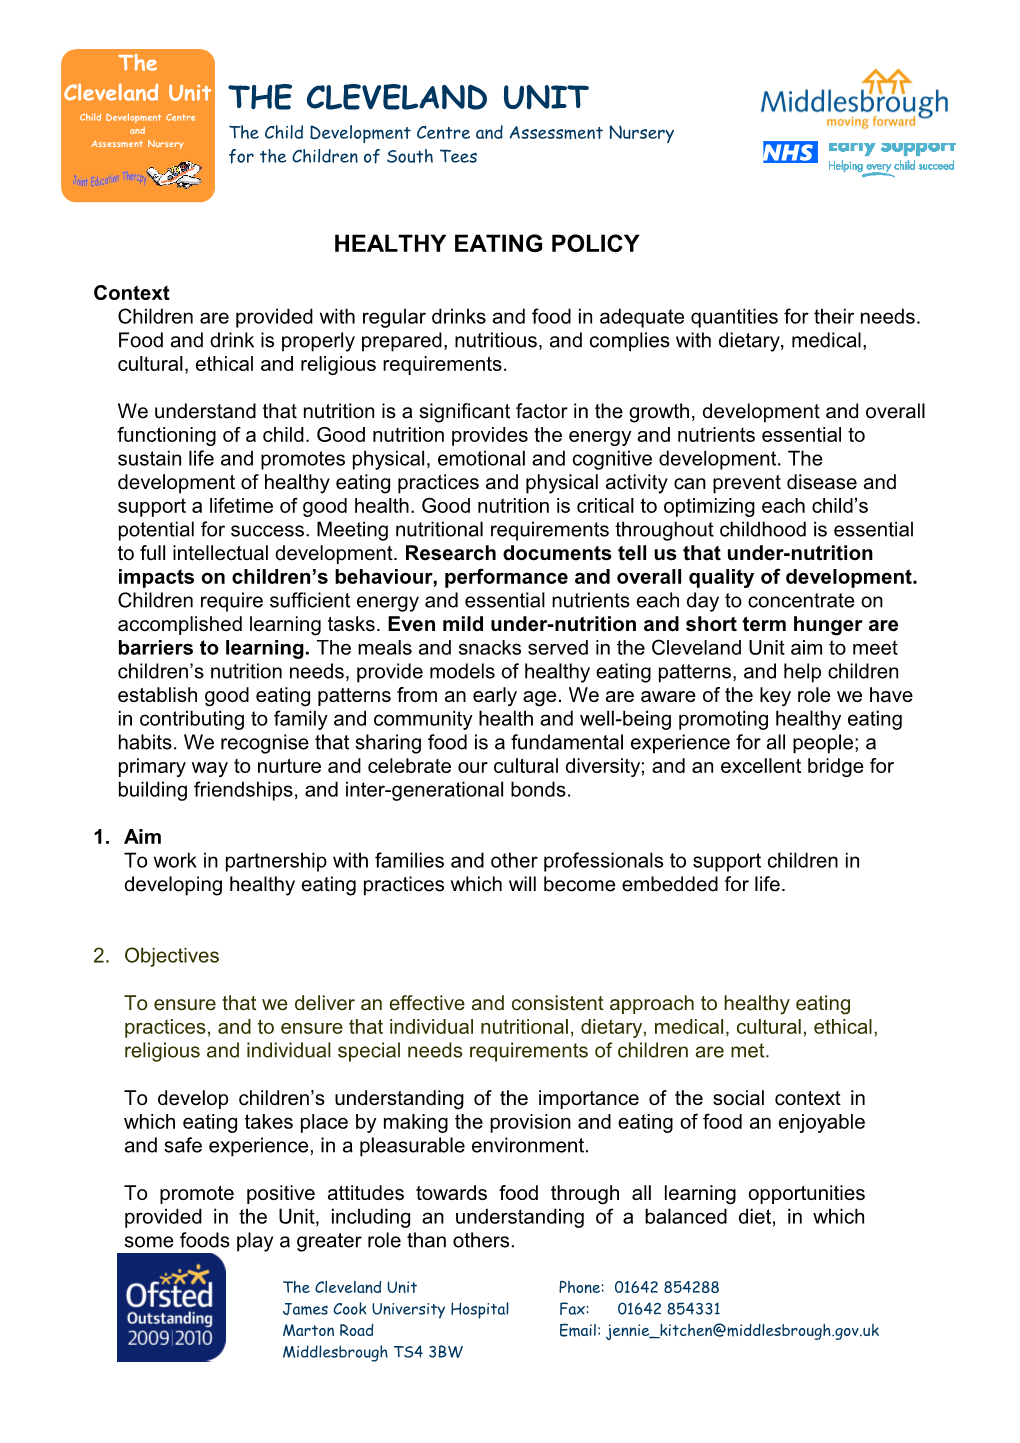 Healthy Eating Policy